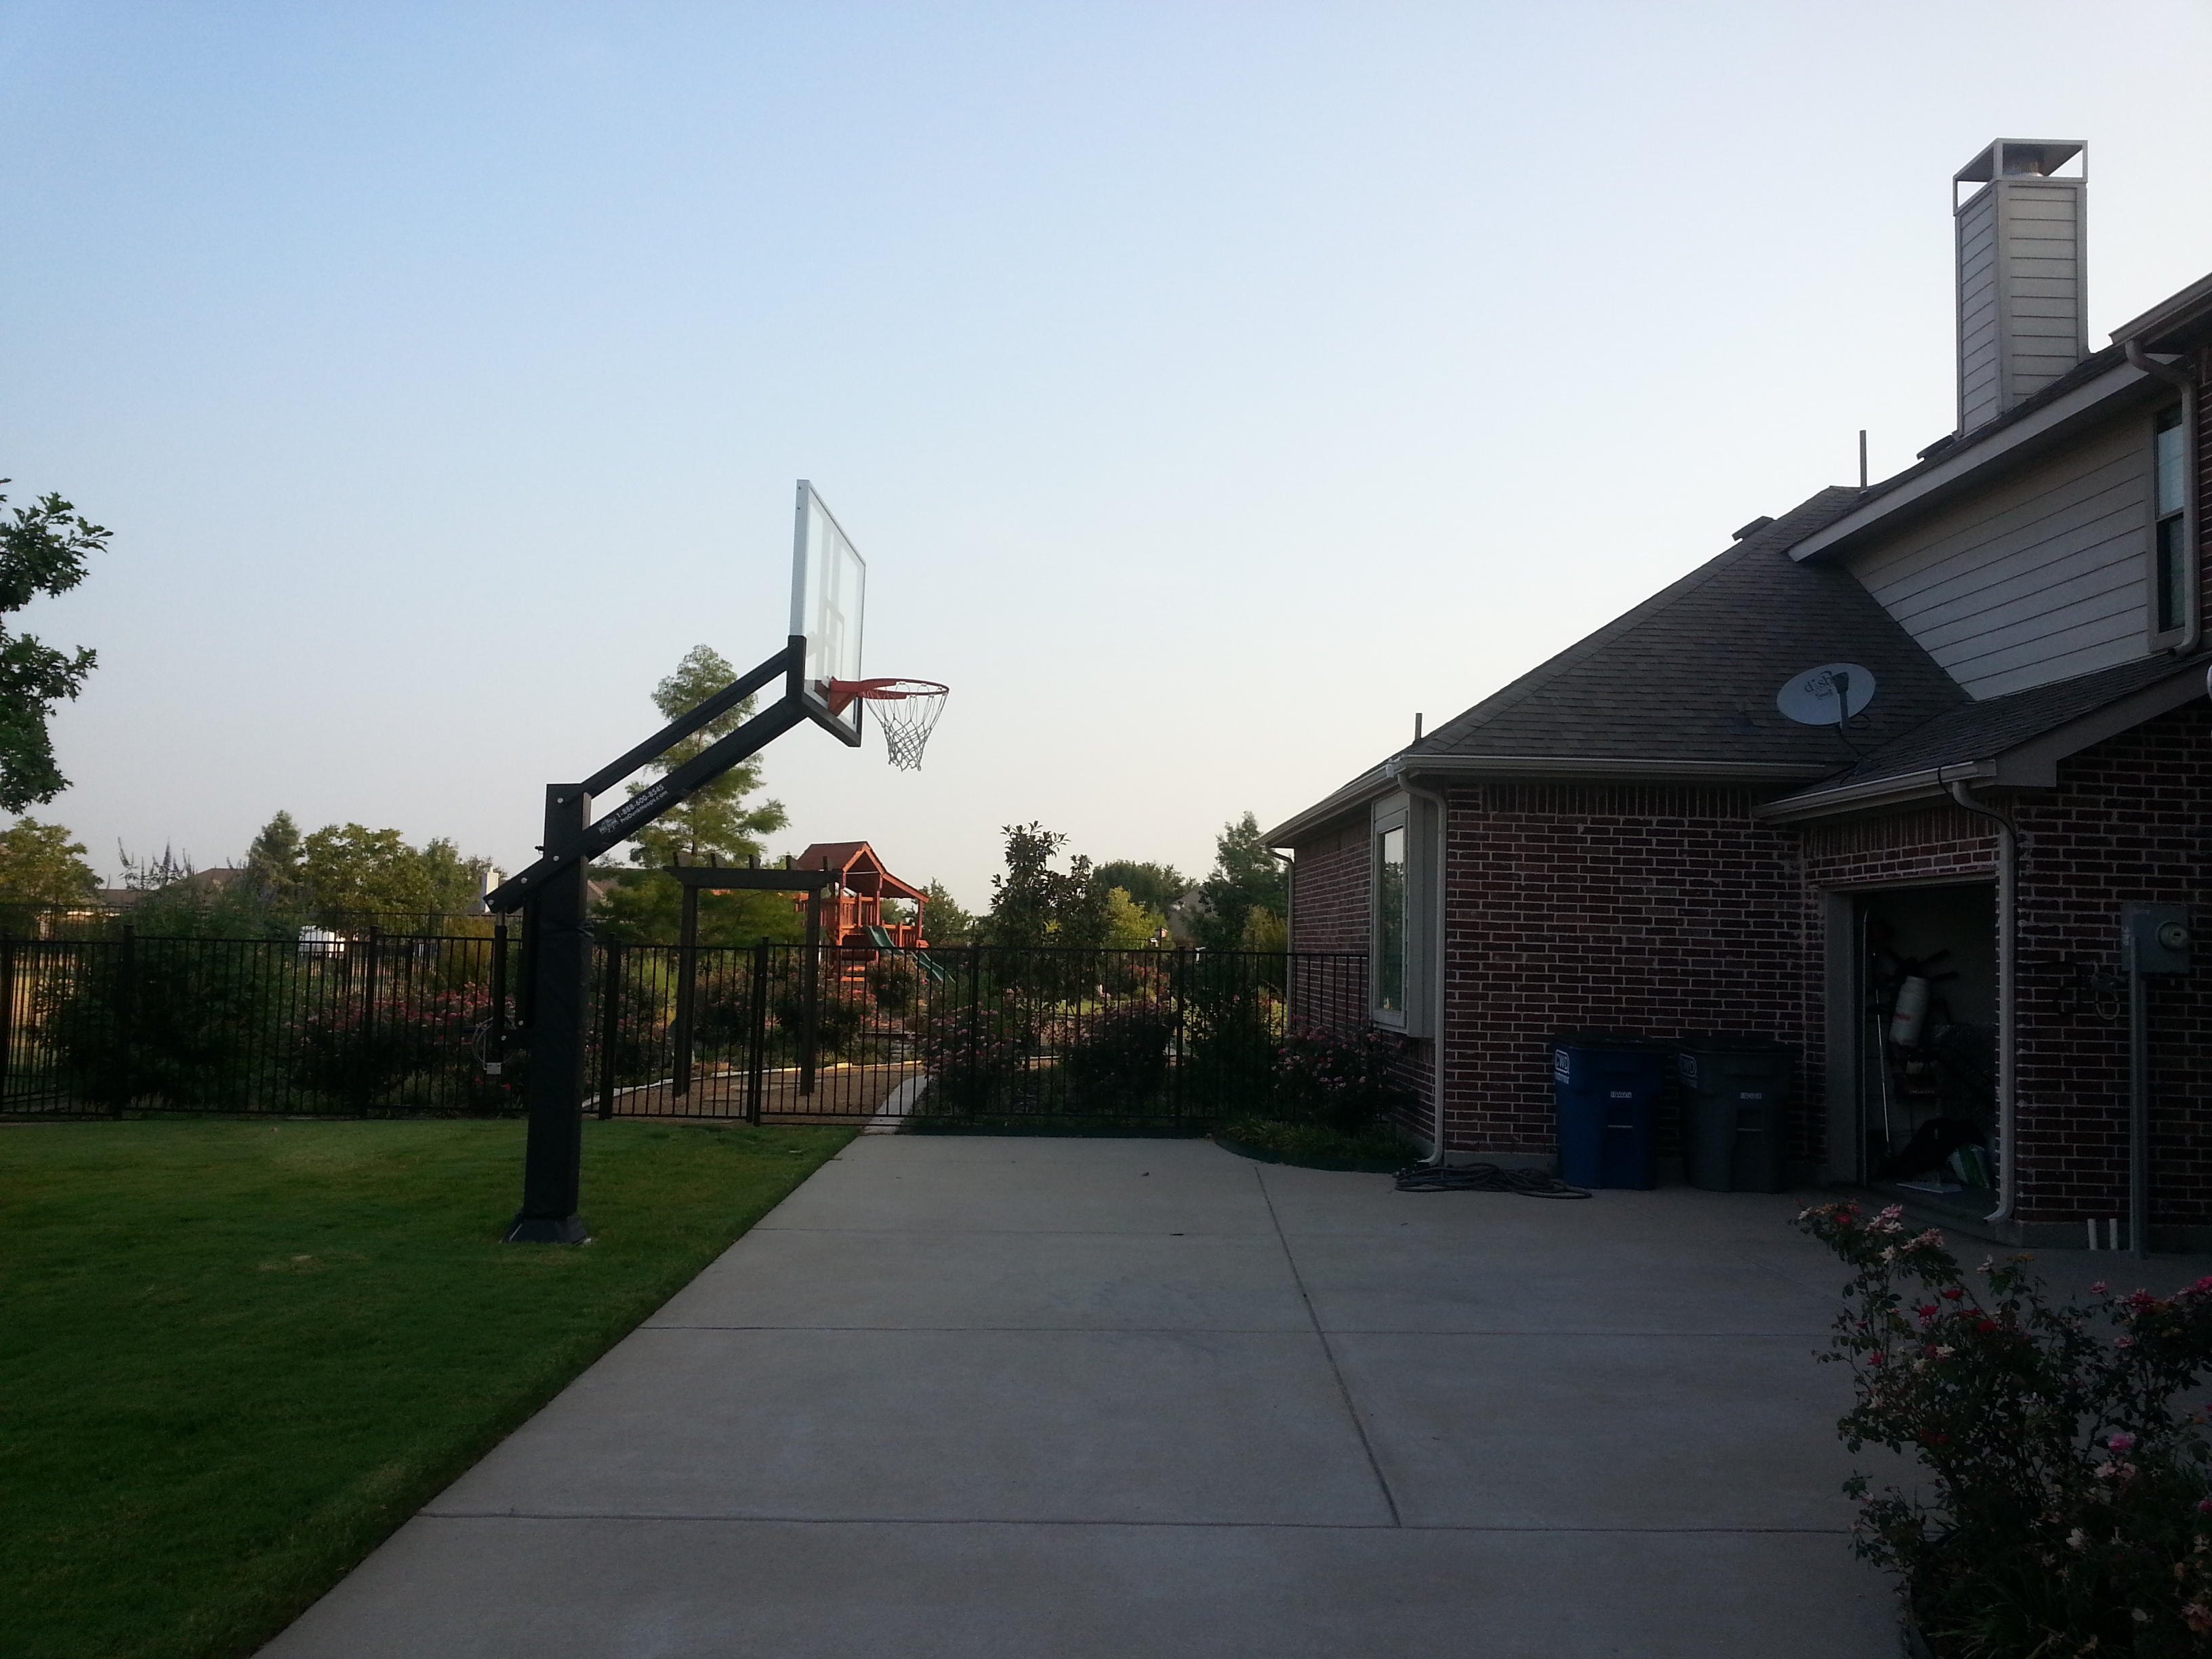 Pro Dunk Platinum Basketball System looks a lot of fun to play in the fenced backyard. 